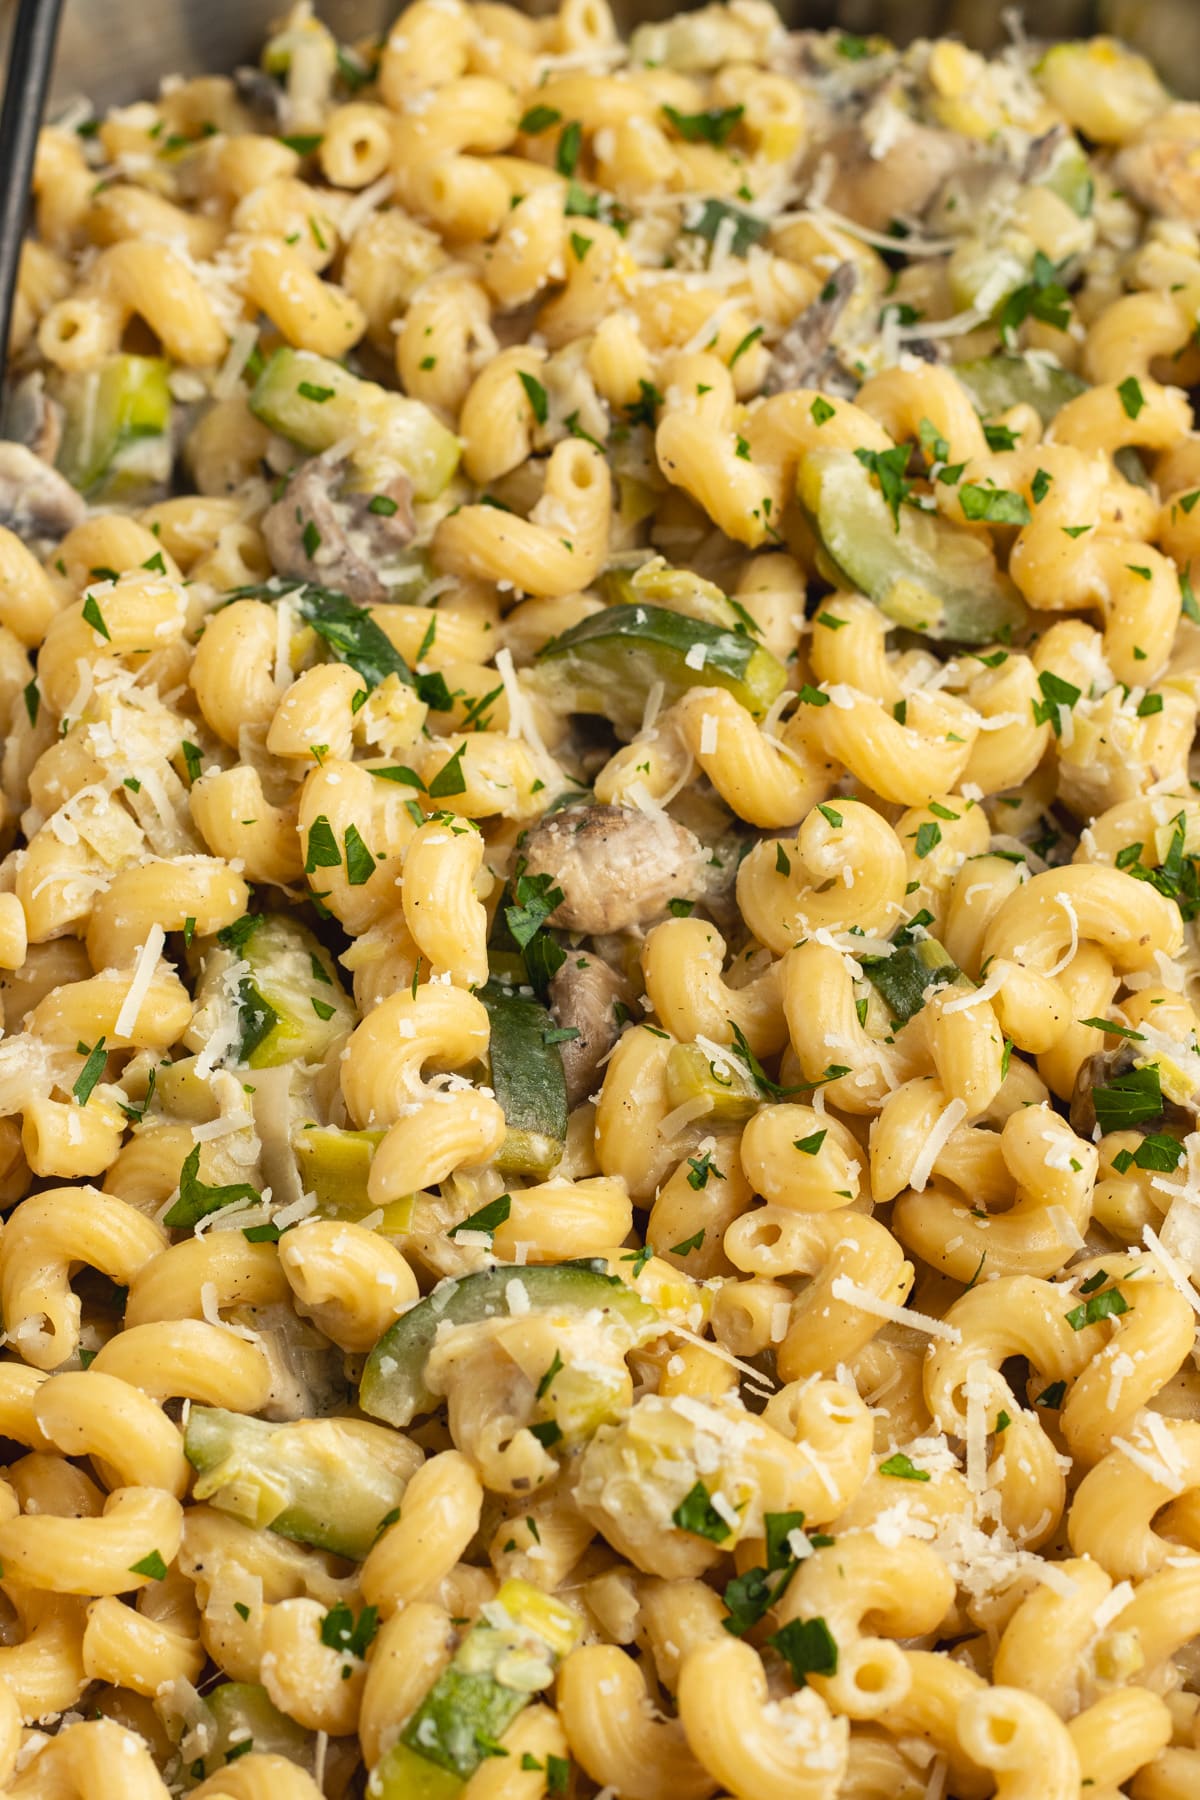 This is a close-up picture for a skillet with the zucchini mushroom leek pasta.